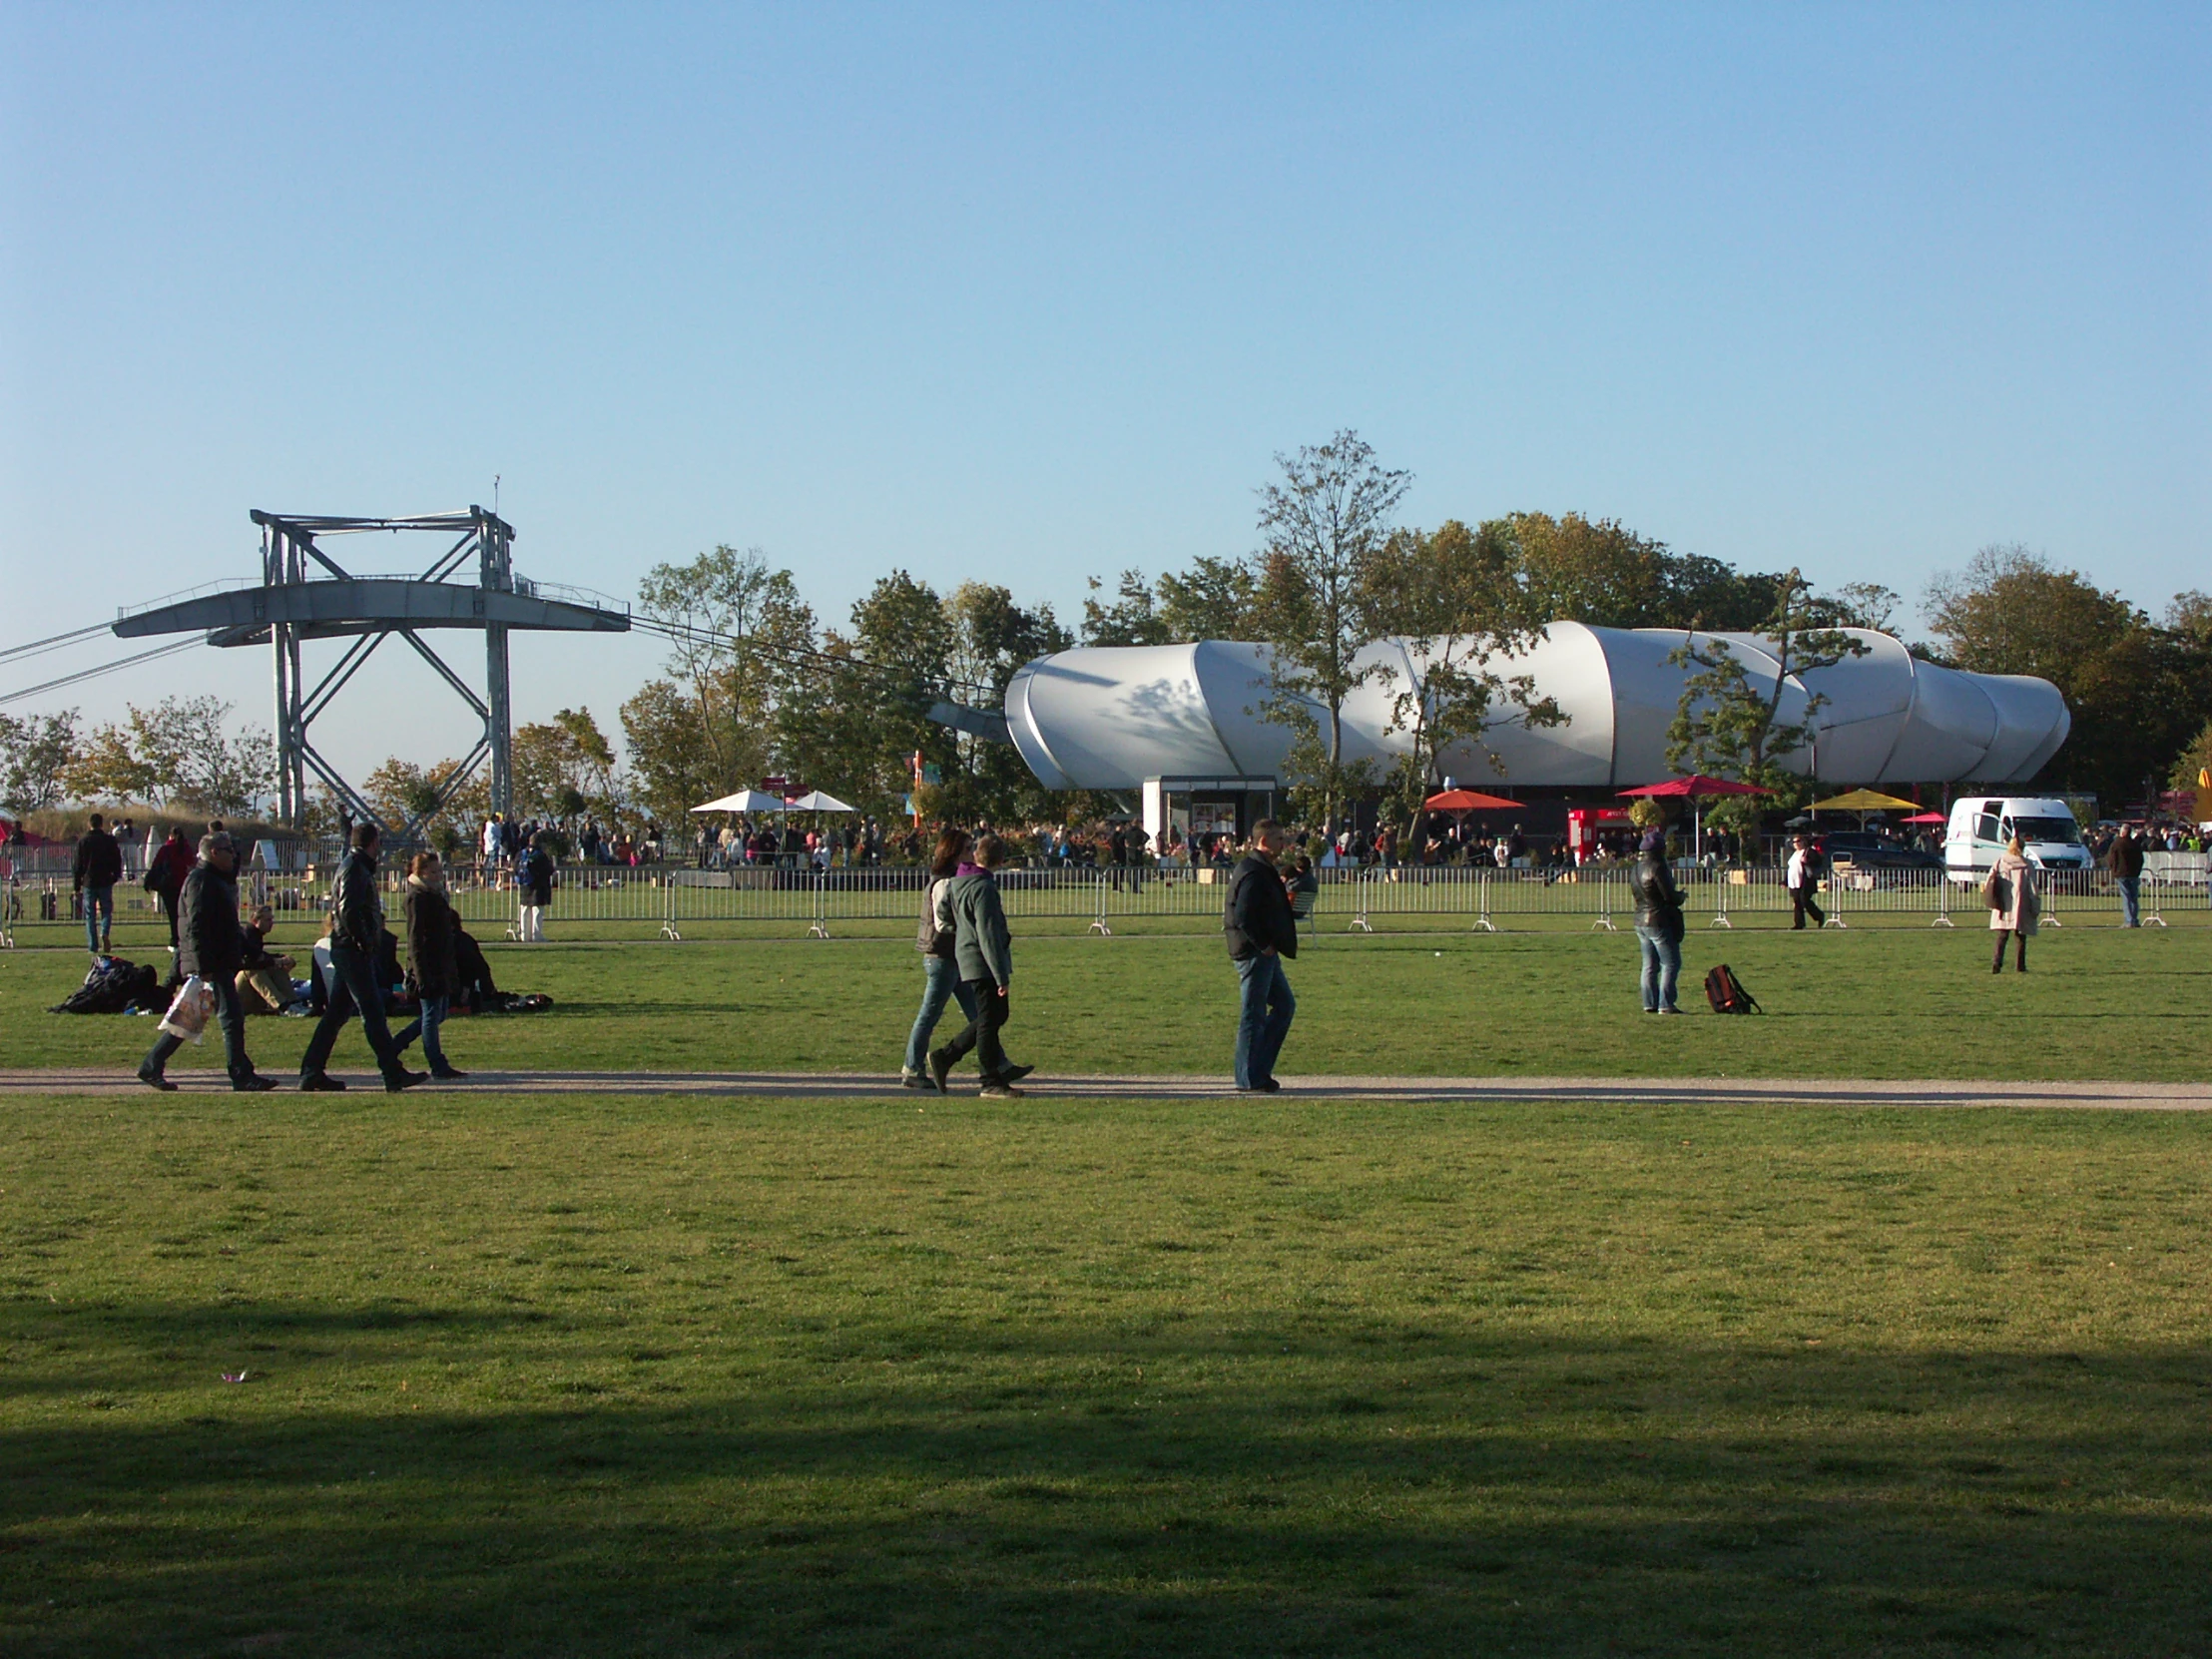 people walking on grass in front of an airplane